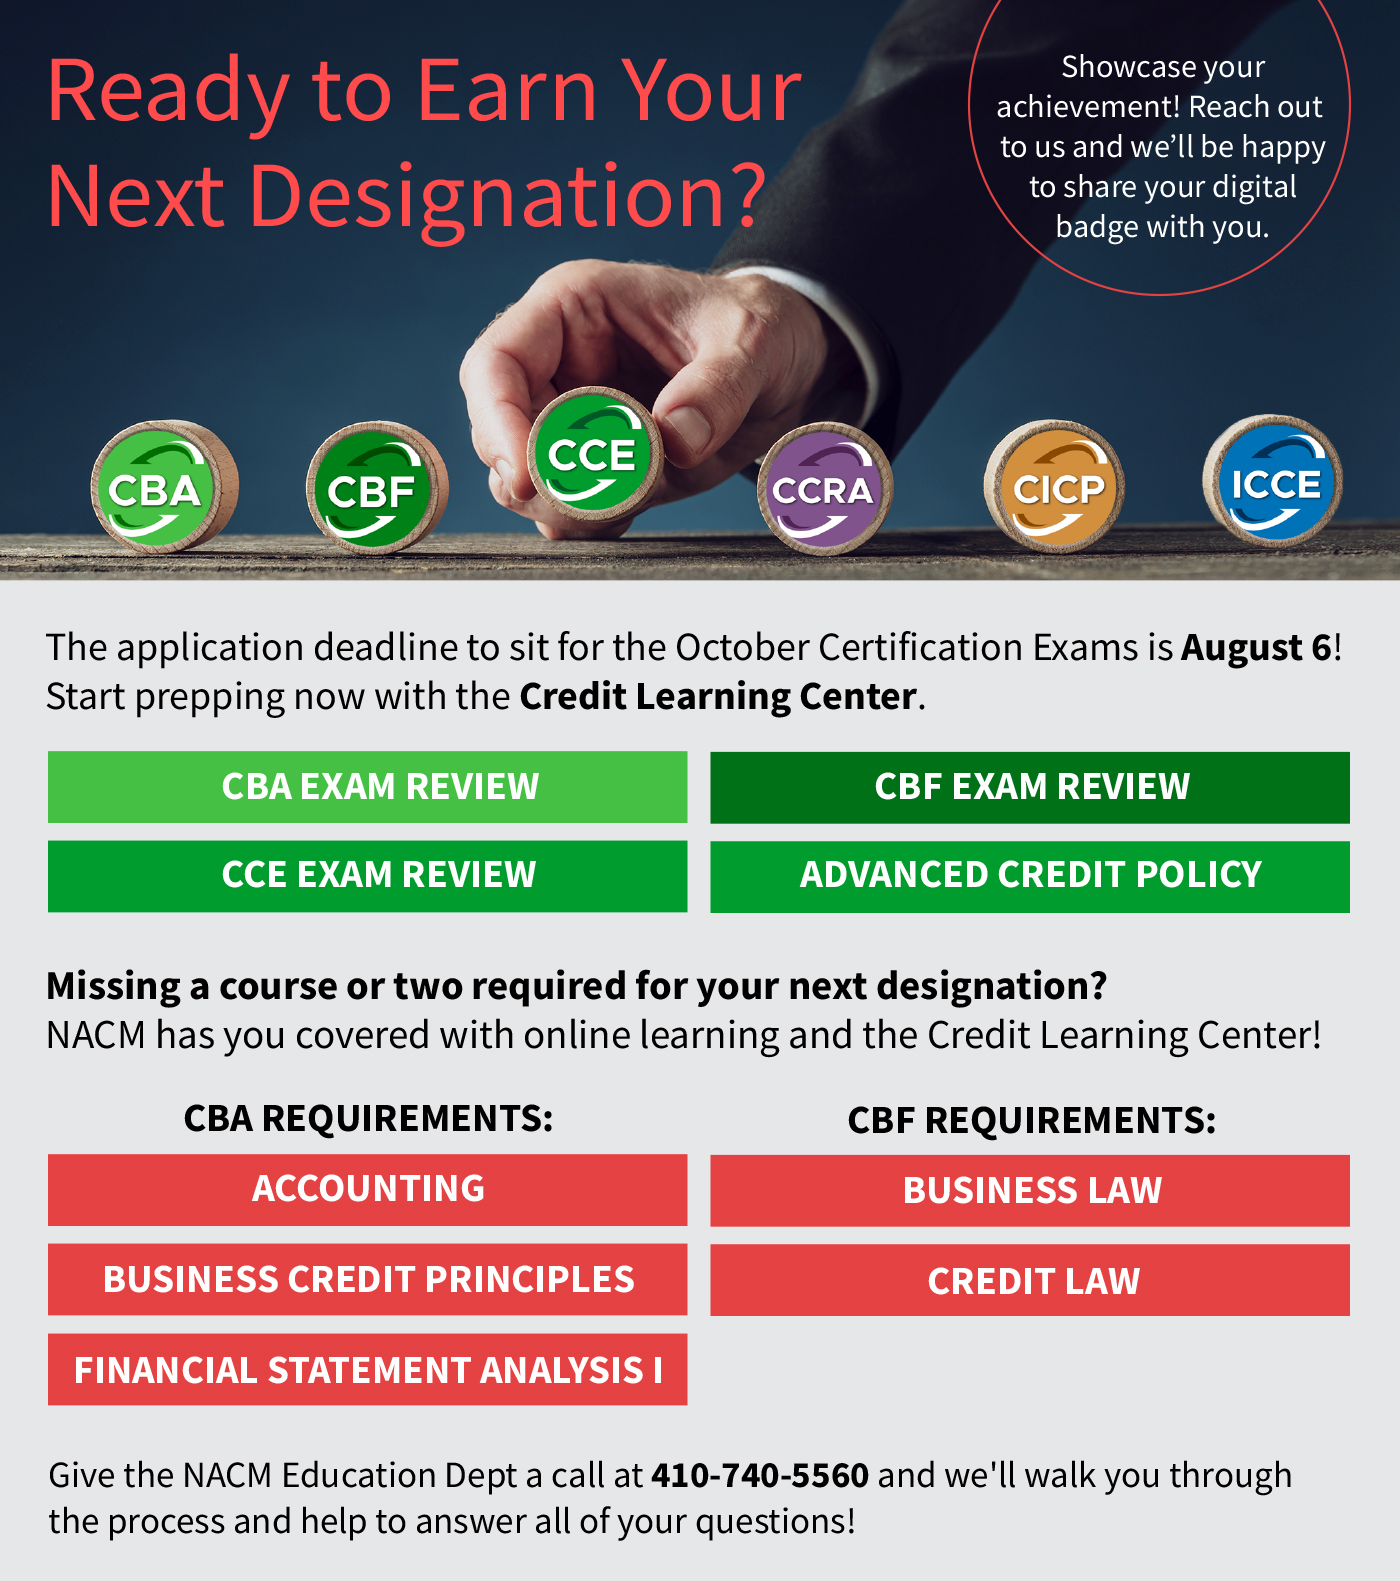 Ready for your certification?